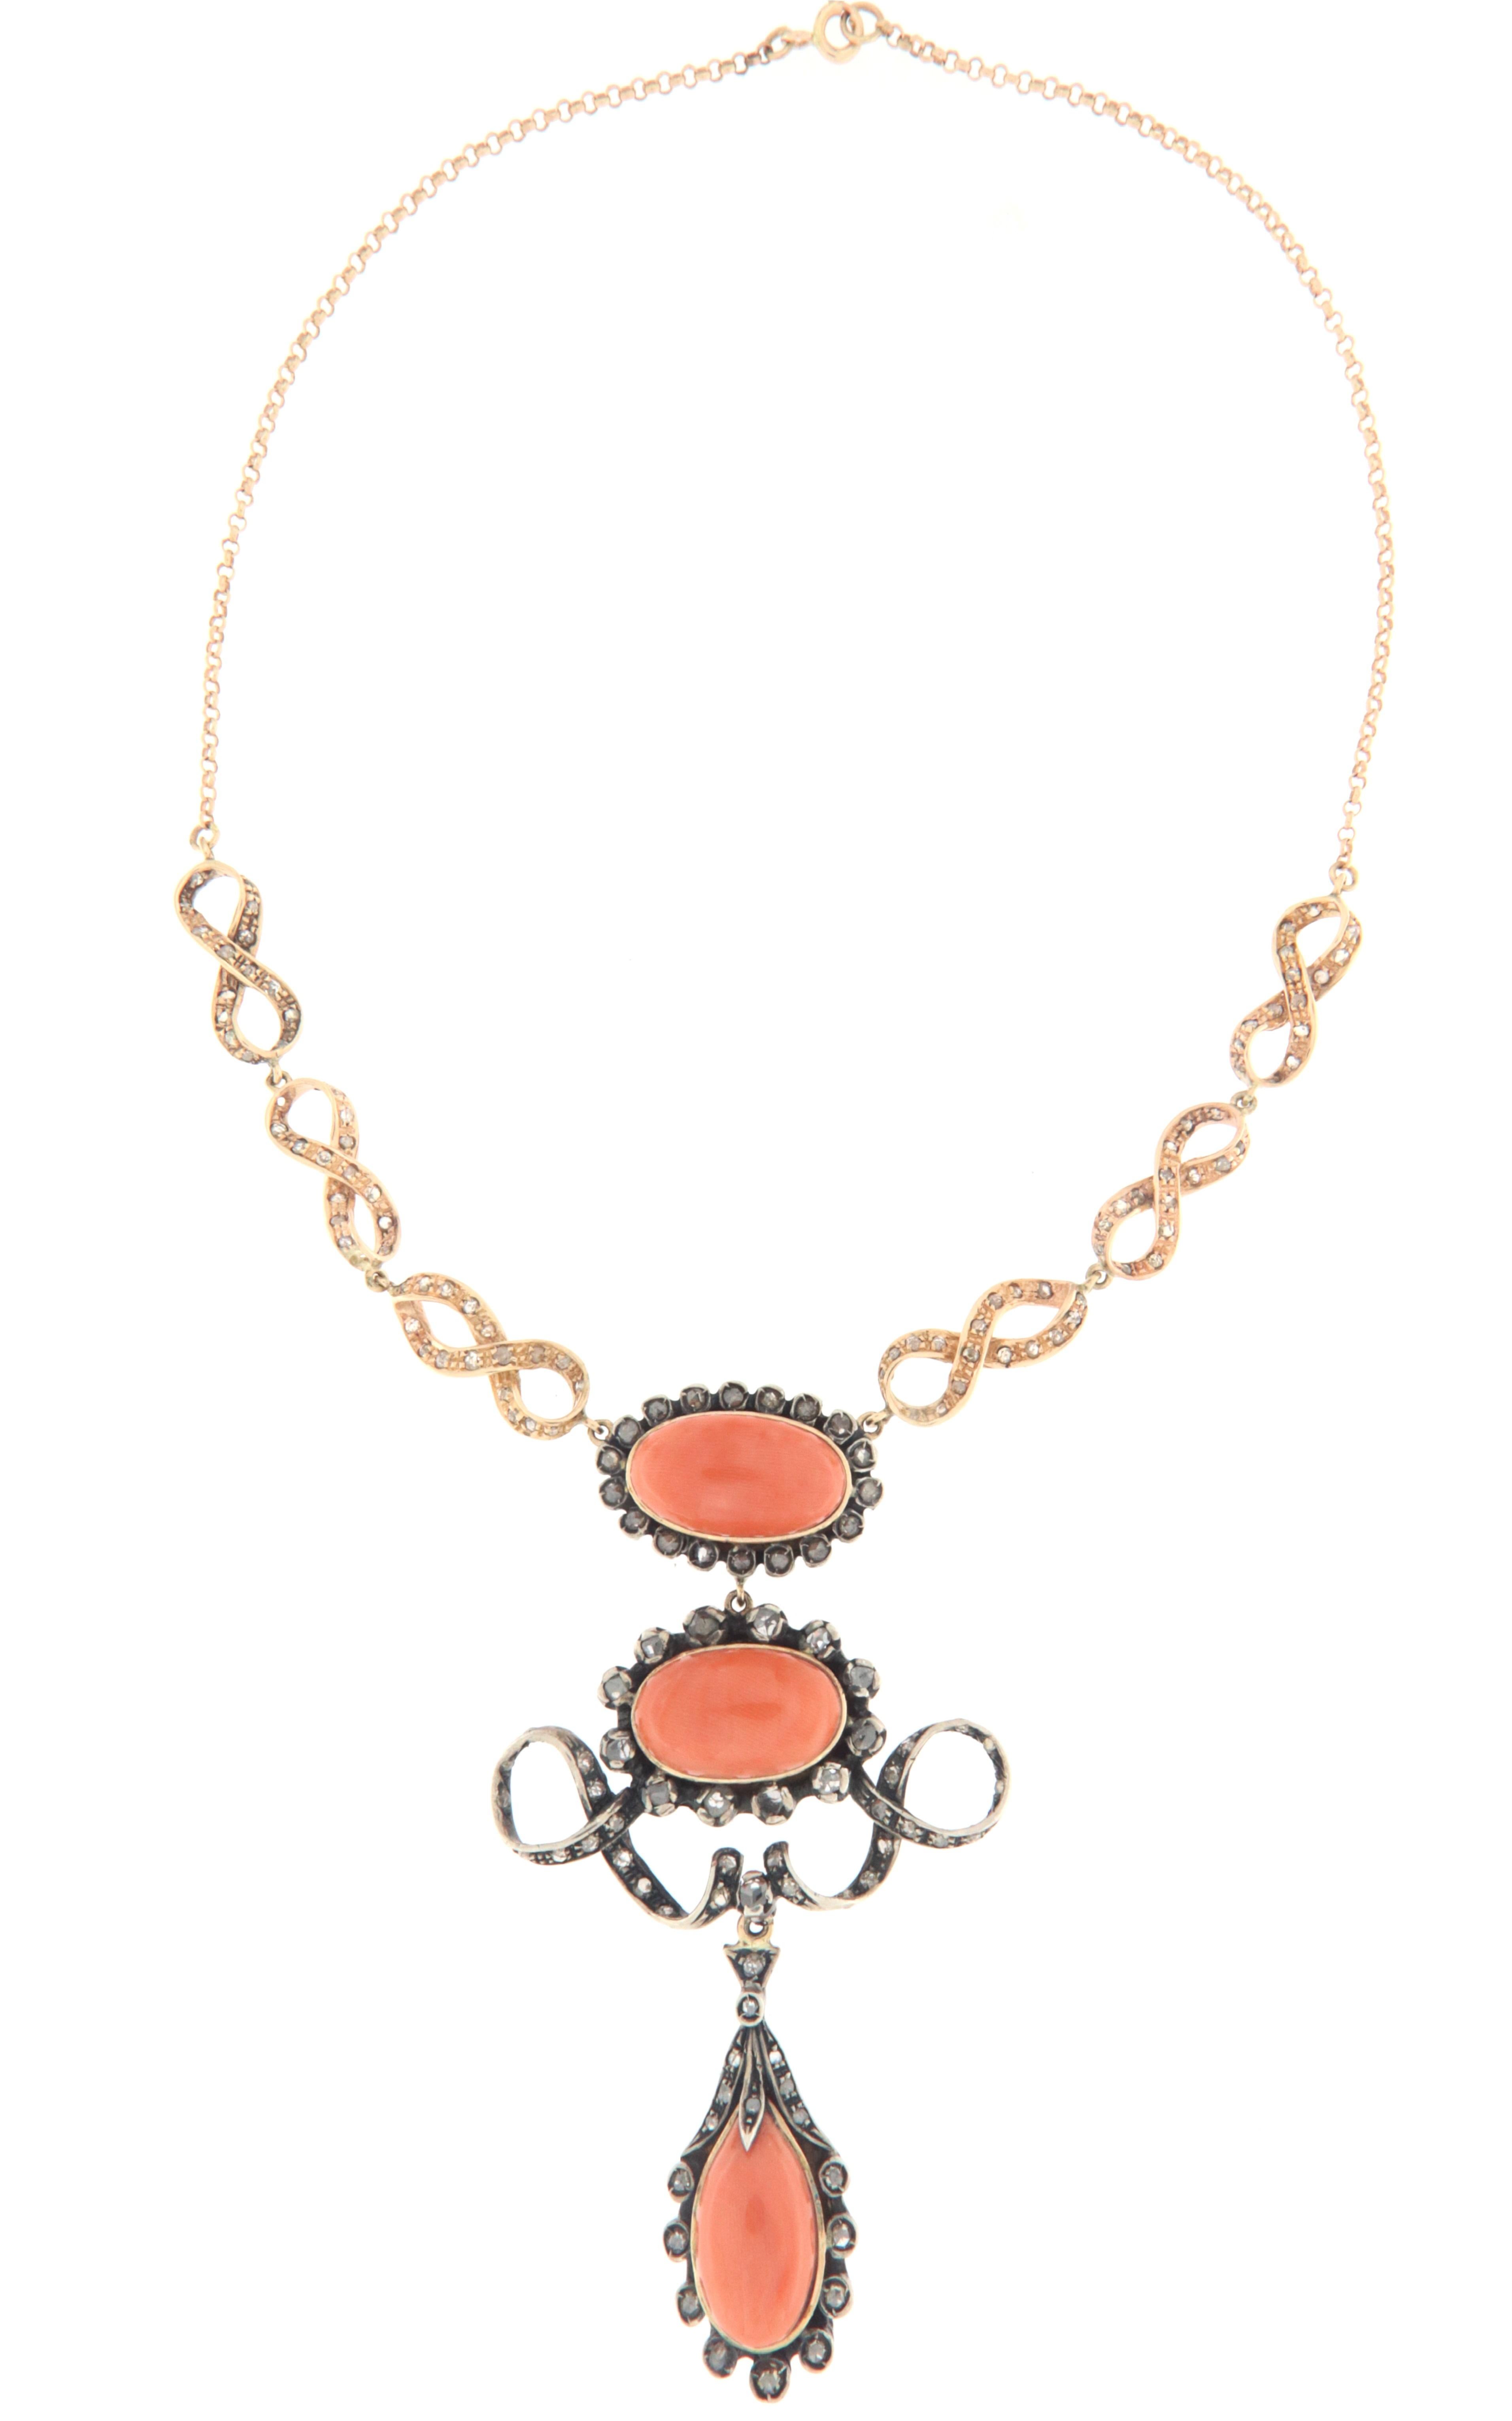 Magnificent necklace made by skilled Neapolitan goldsmiths that recalls the charm of the Baroque era, many intertwining flourishes characterize the design of this jewel made in part with 800 thousandths silver rose cut diamonds,natural coral and 14